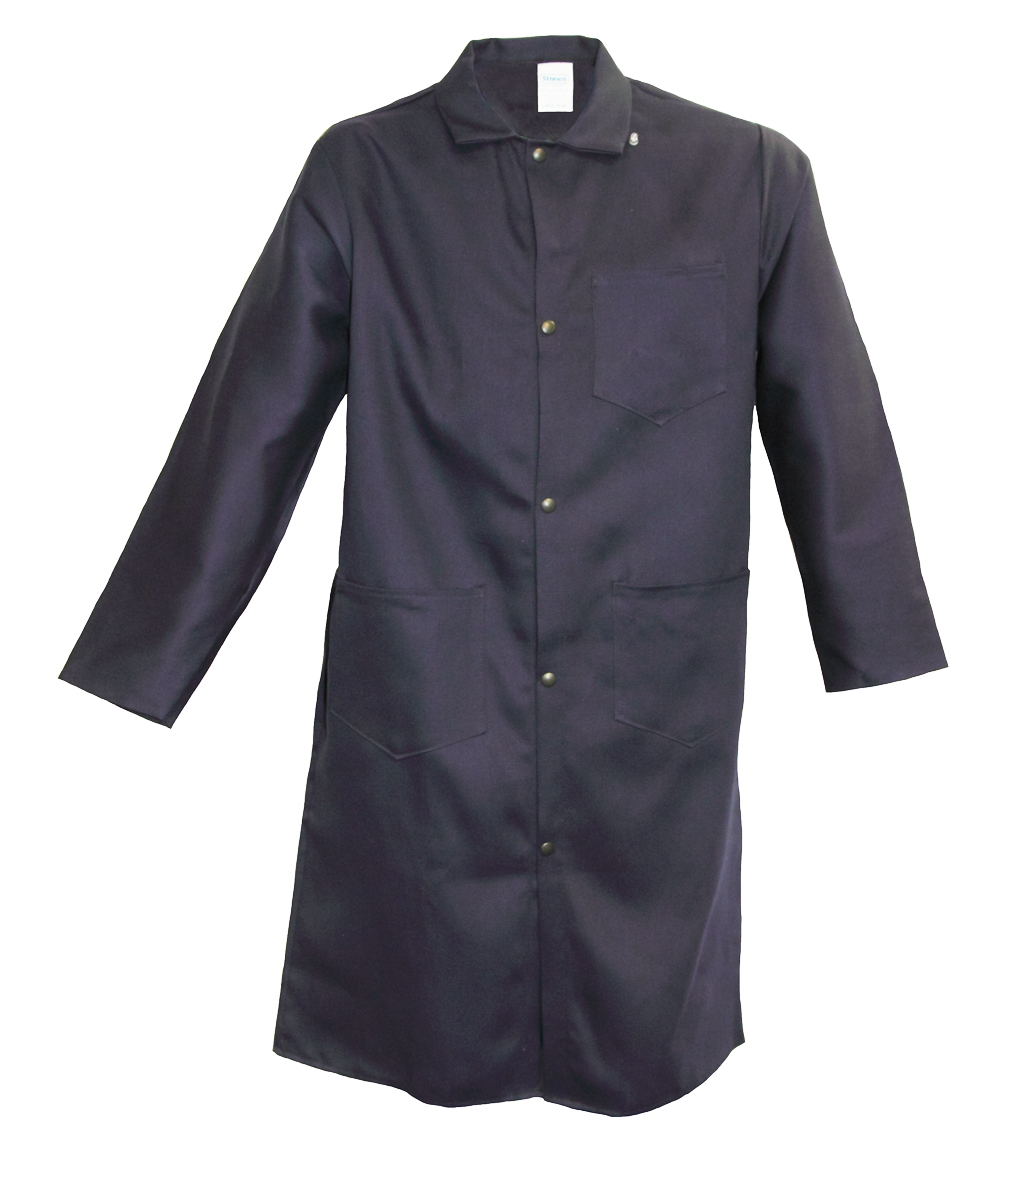 Stanco Safety Products™ 2X Navy Blue Indura® Cotton Flame Resistant Lab Coat